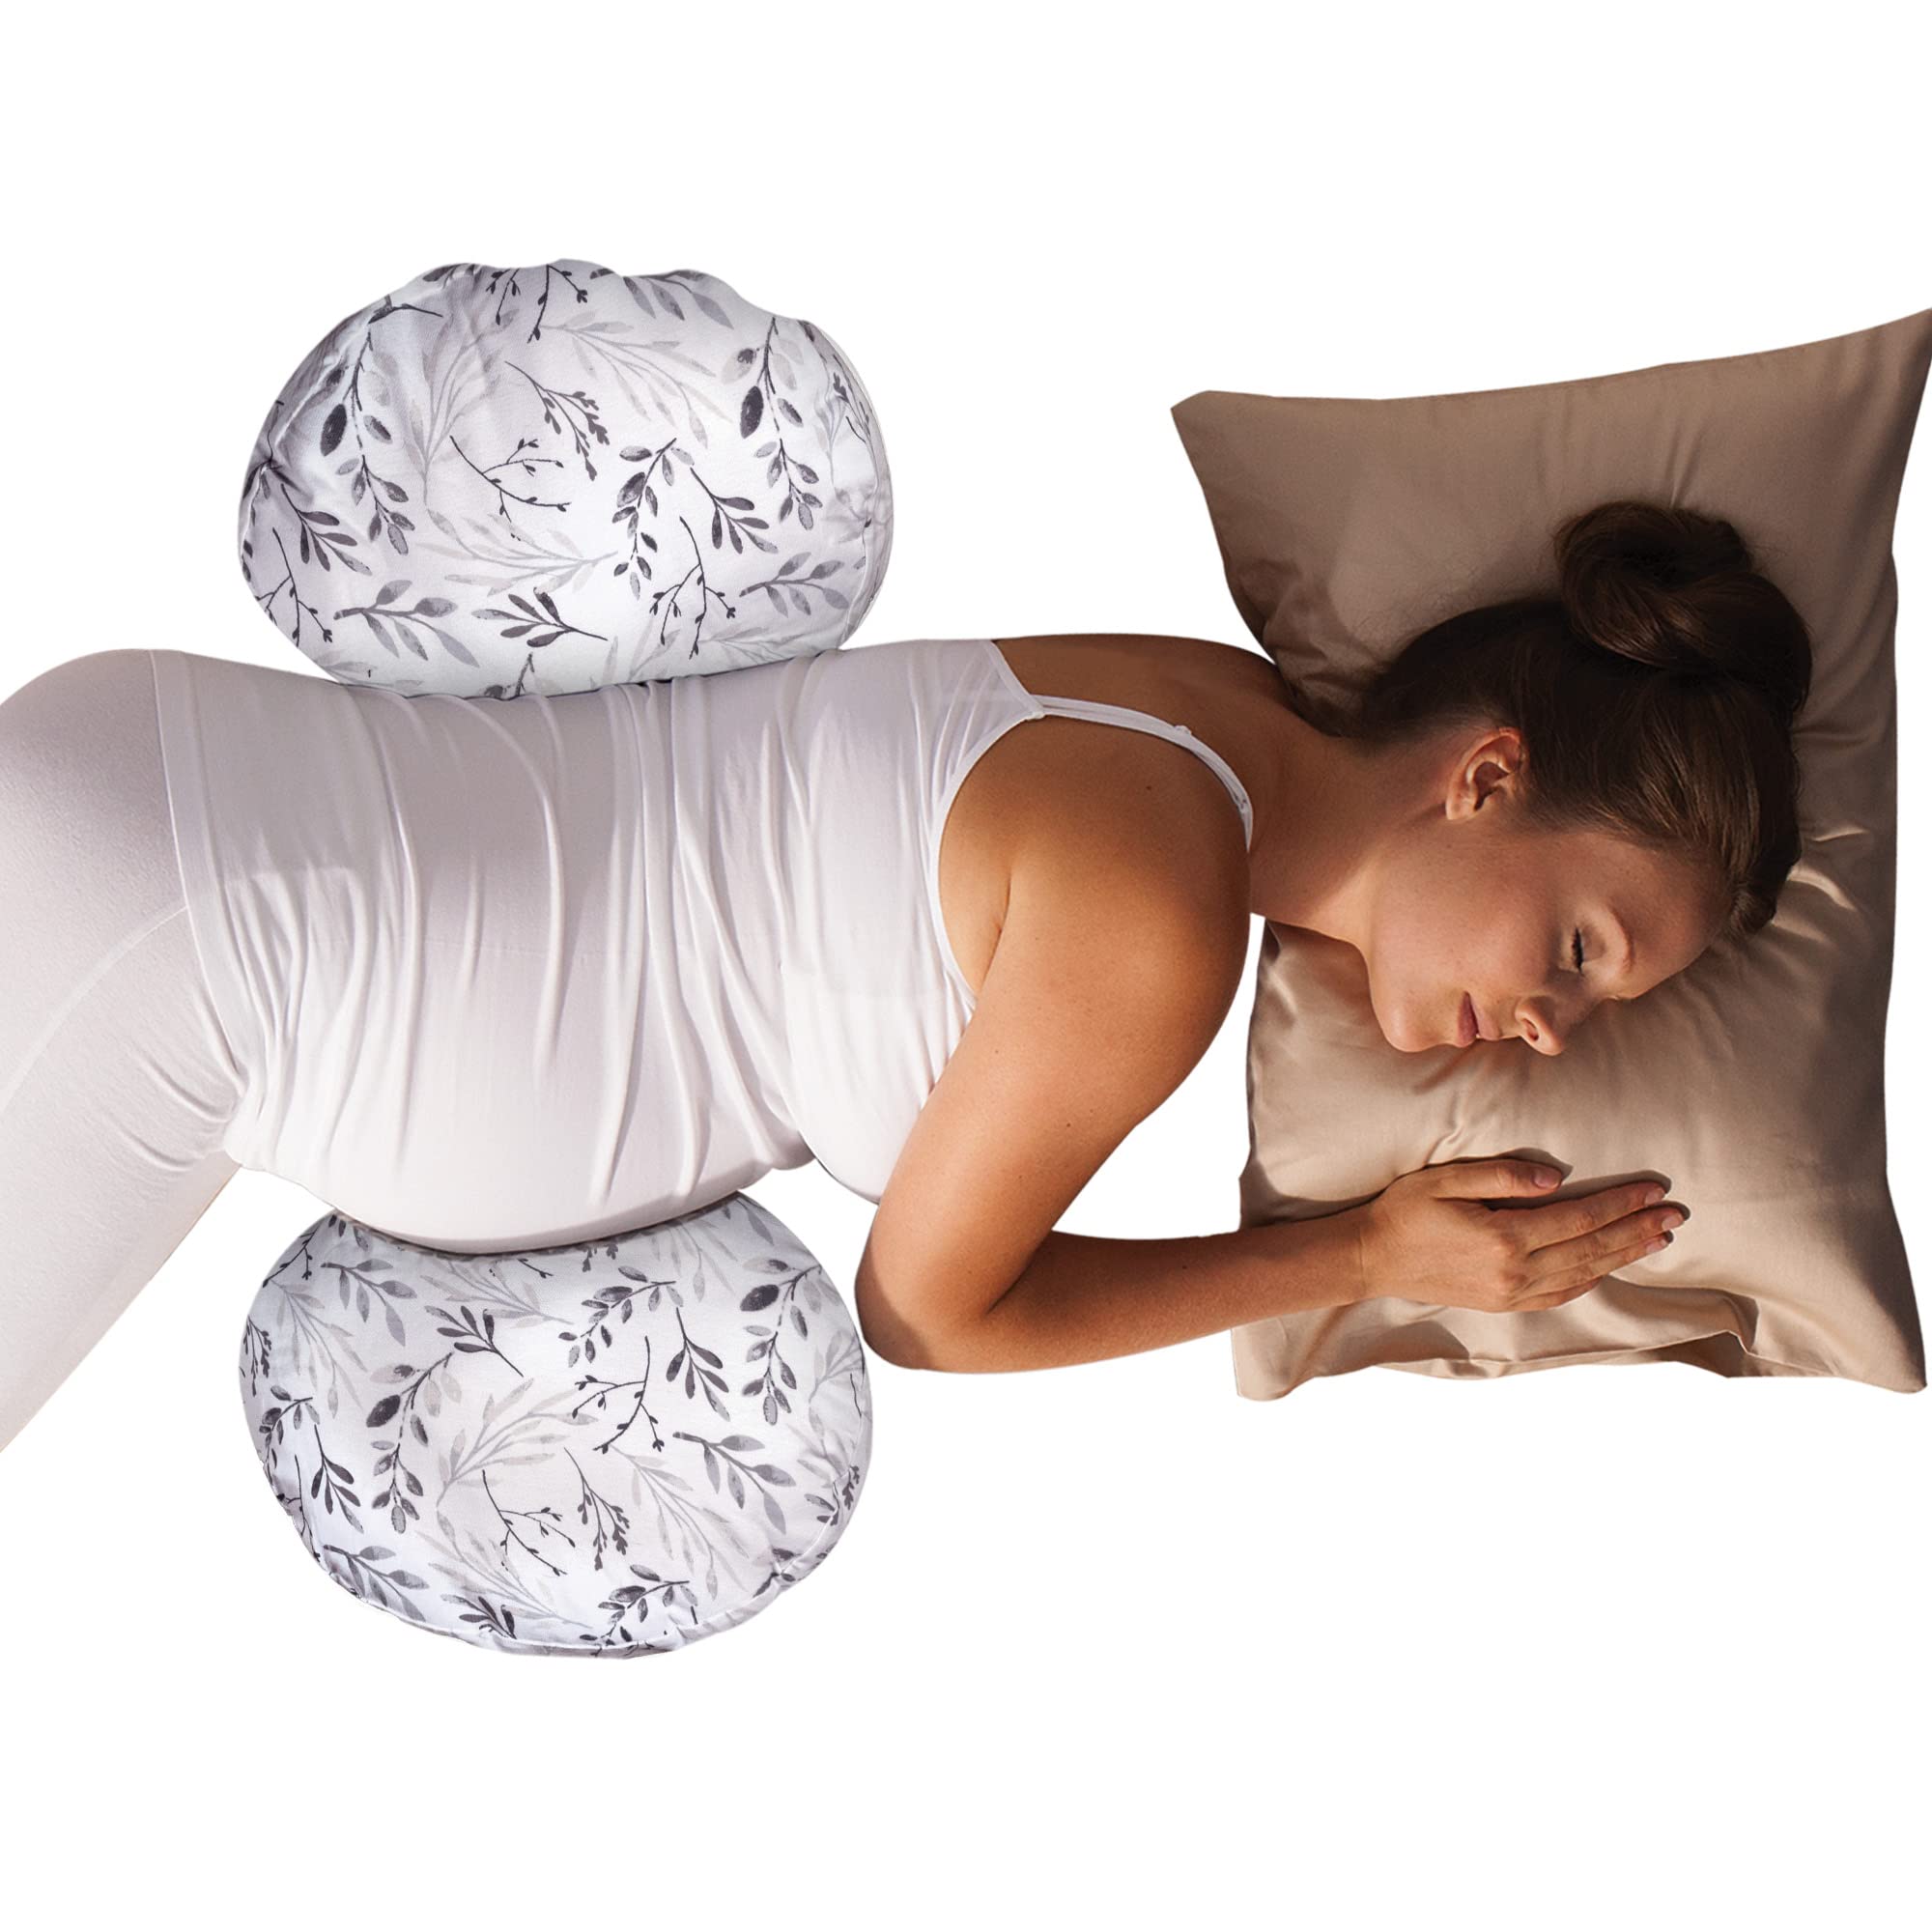 Boppy Side Sleeper Pregnancy Pillow with Removable Jersey Pillow Cover, Gray Falling Leaves, Compact Stay-Put Design with Signature Stretch Panel, Prenatal and Postnatal Positioning